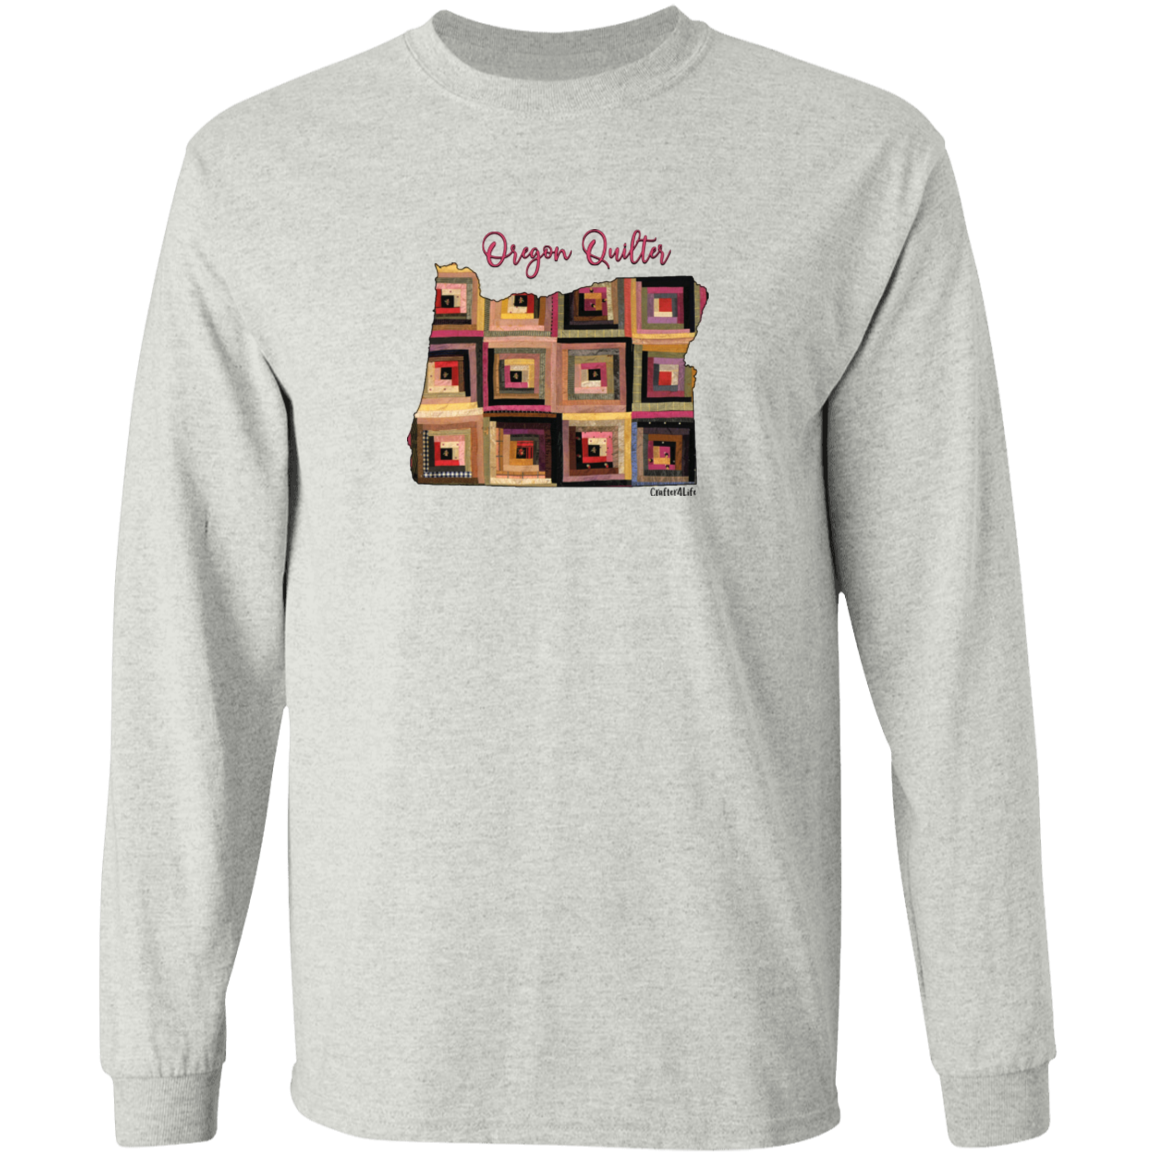 Oregon Quilter Long Sleeve T-Shirt, Gift for Quilting Friends and Family